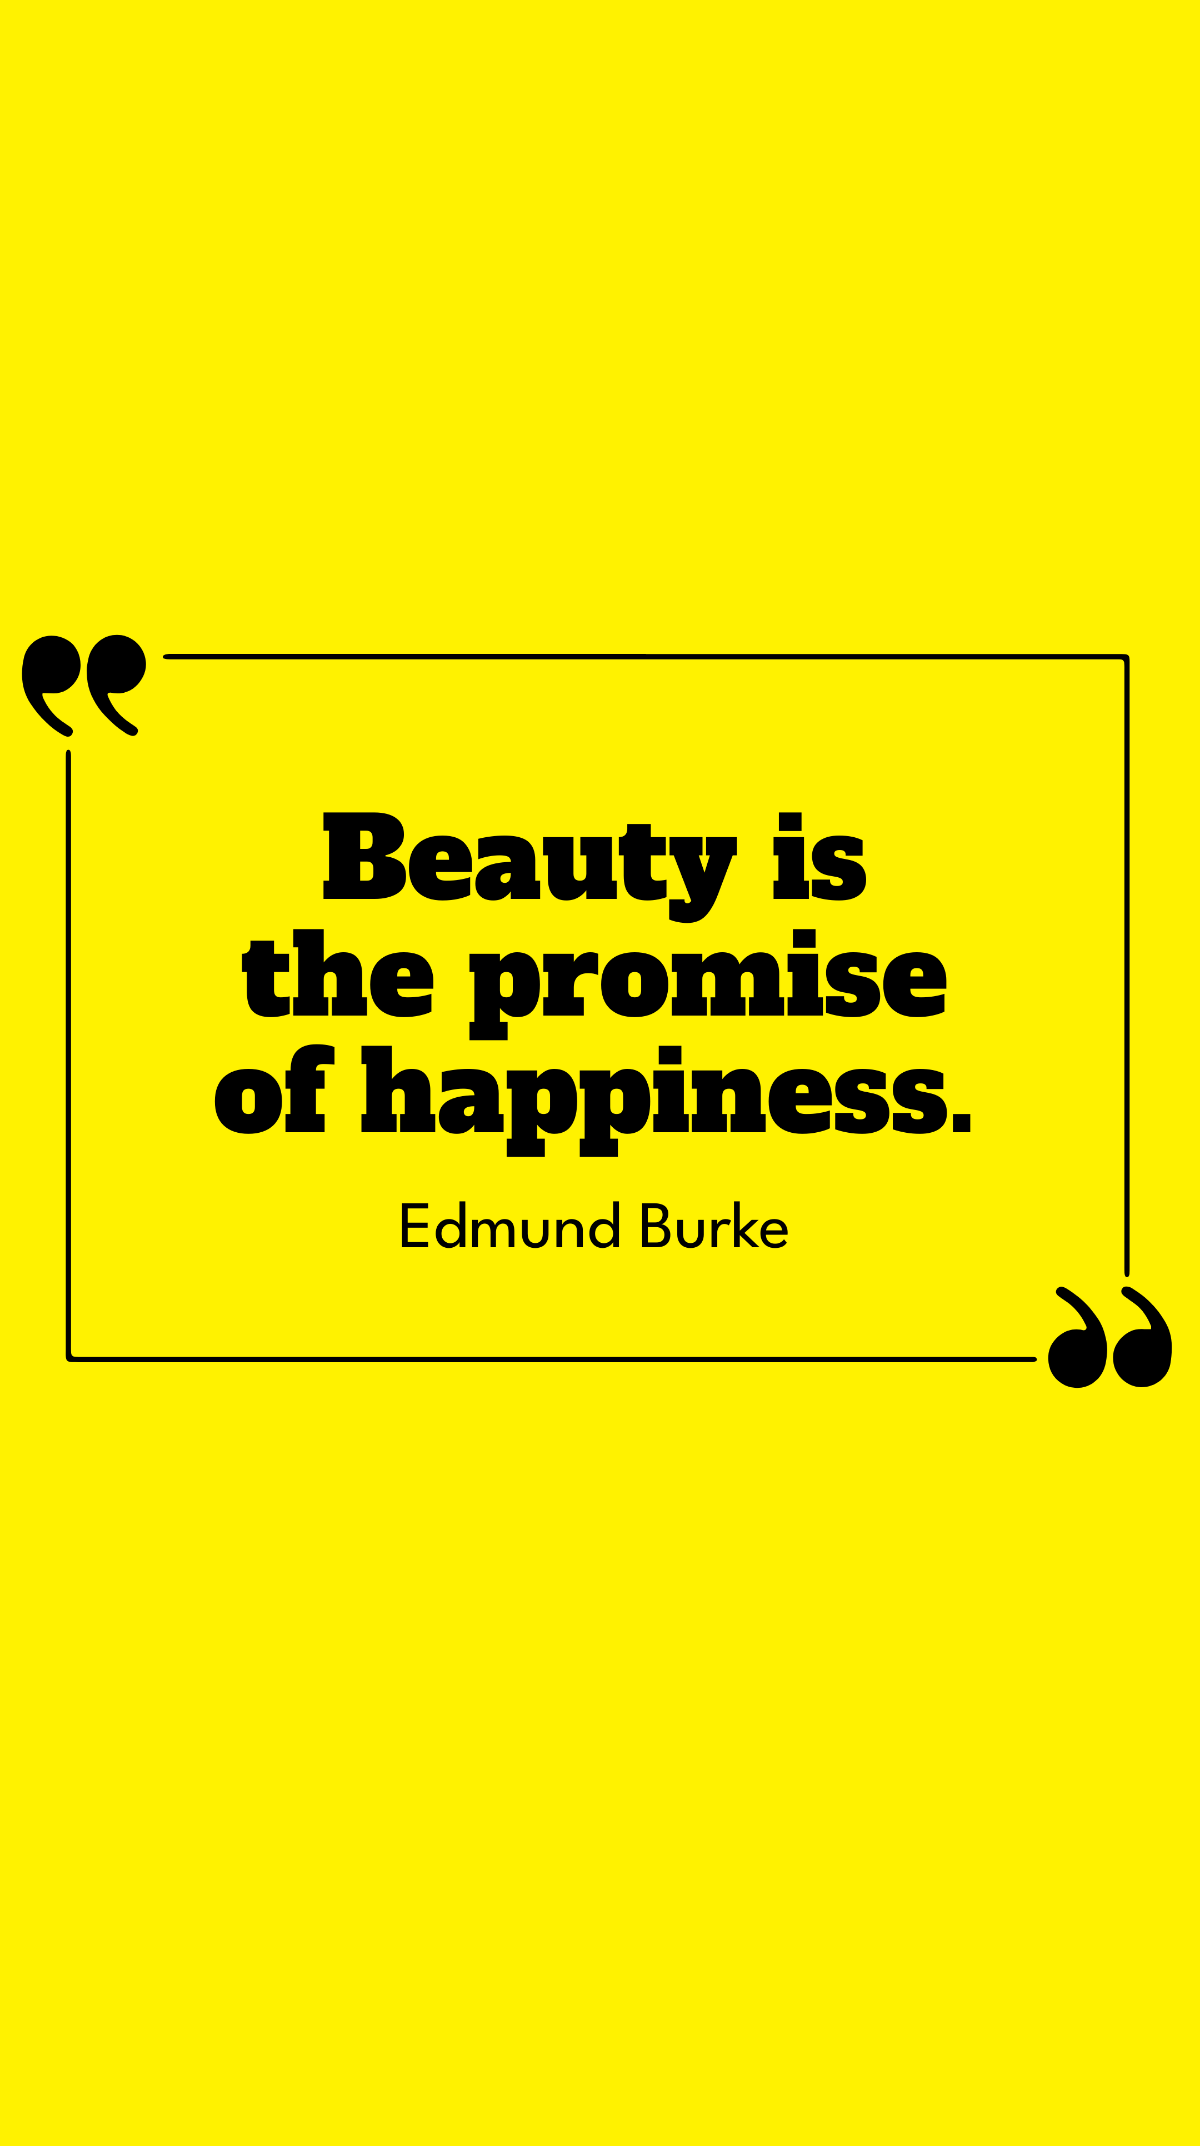 Free Edmund Burke - Beauty is the promise of happiness. Template